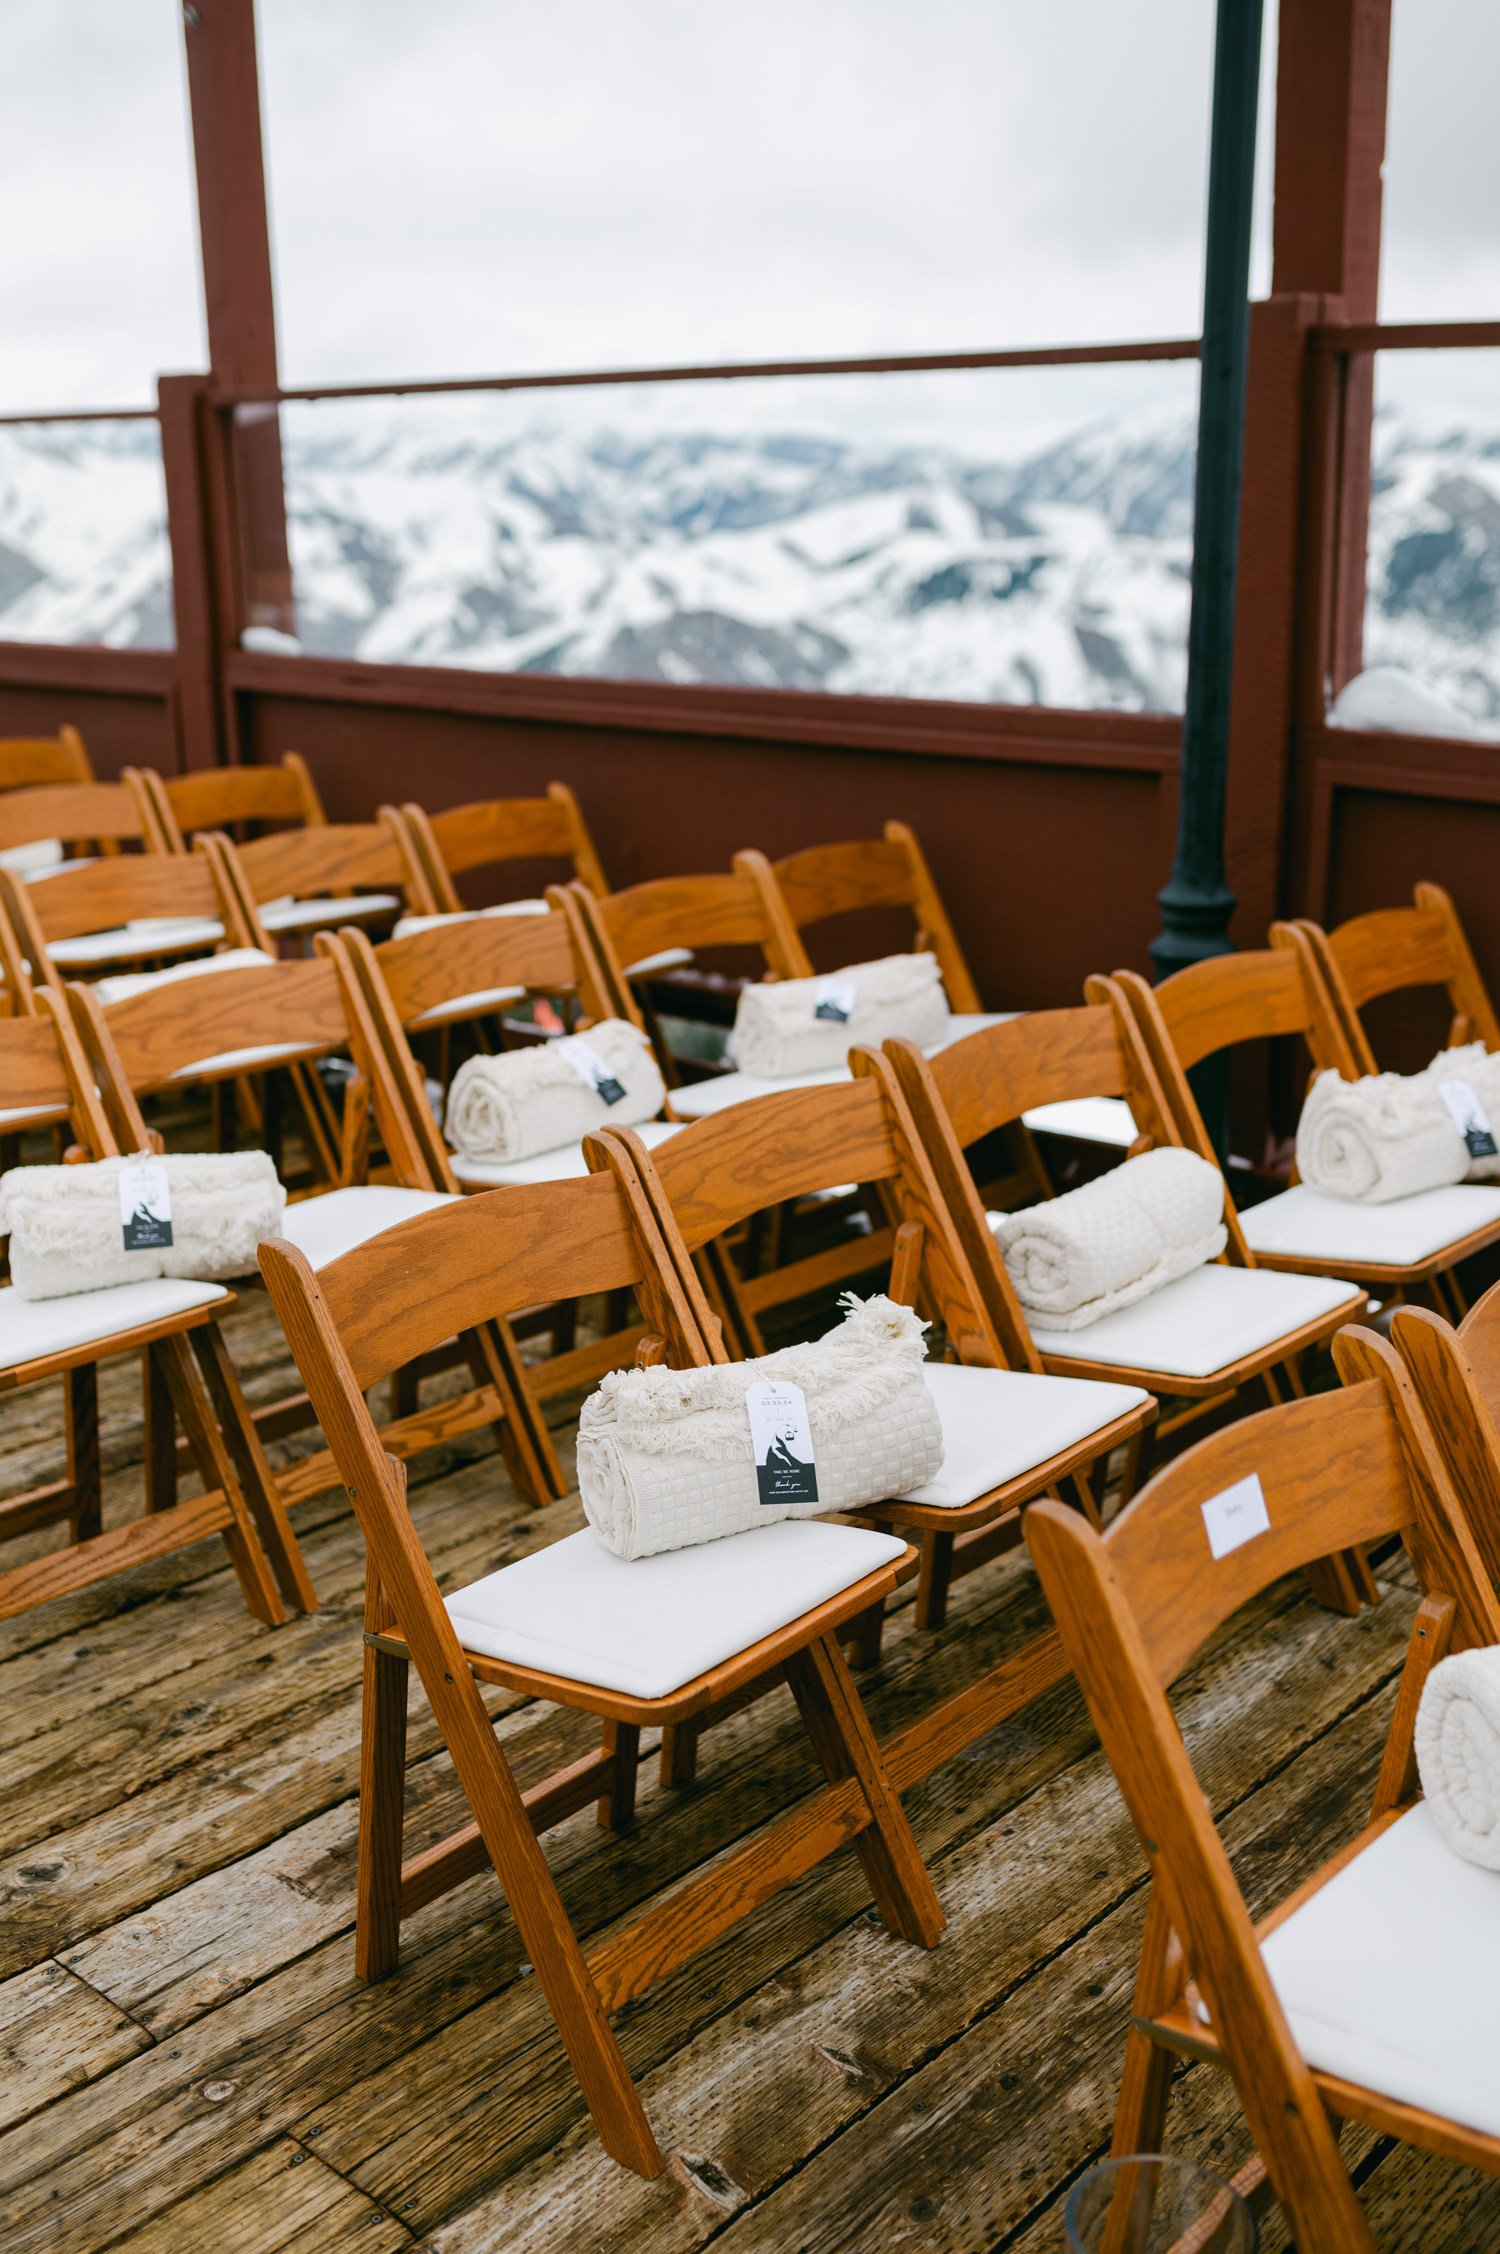 Sun Valley Roundhouse Wedding photos of the wooden chairs with blanket provided for their guests